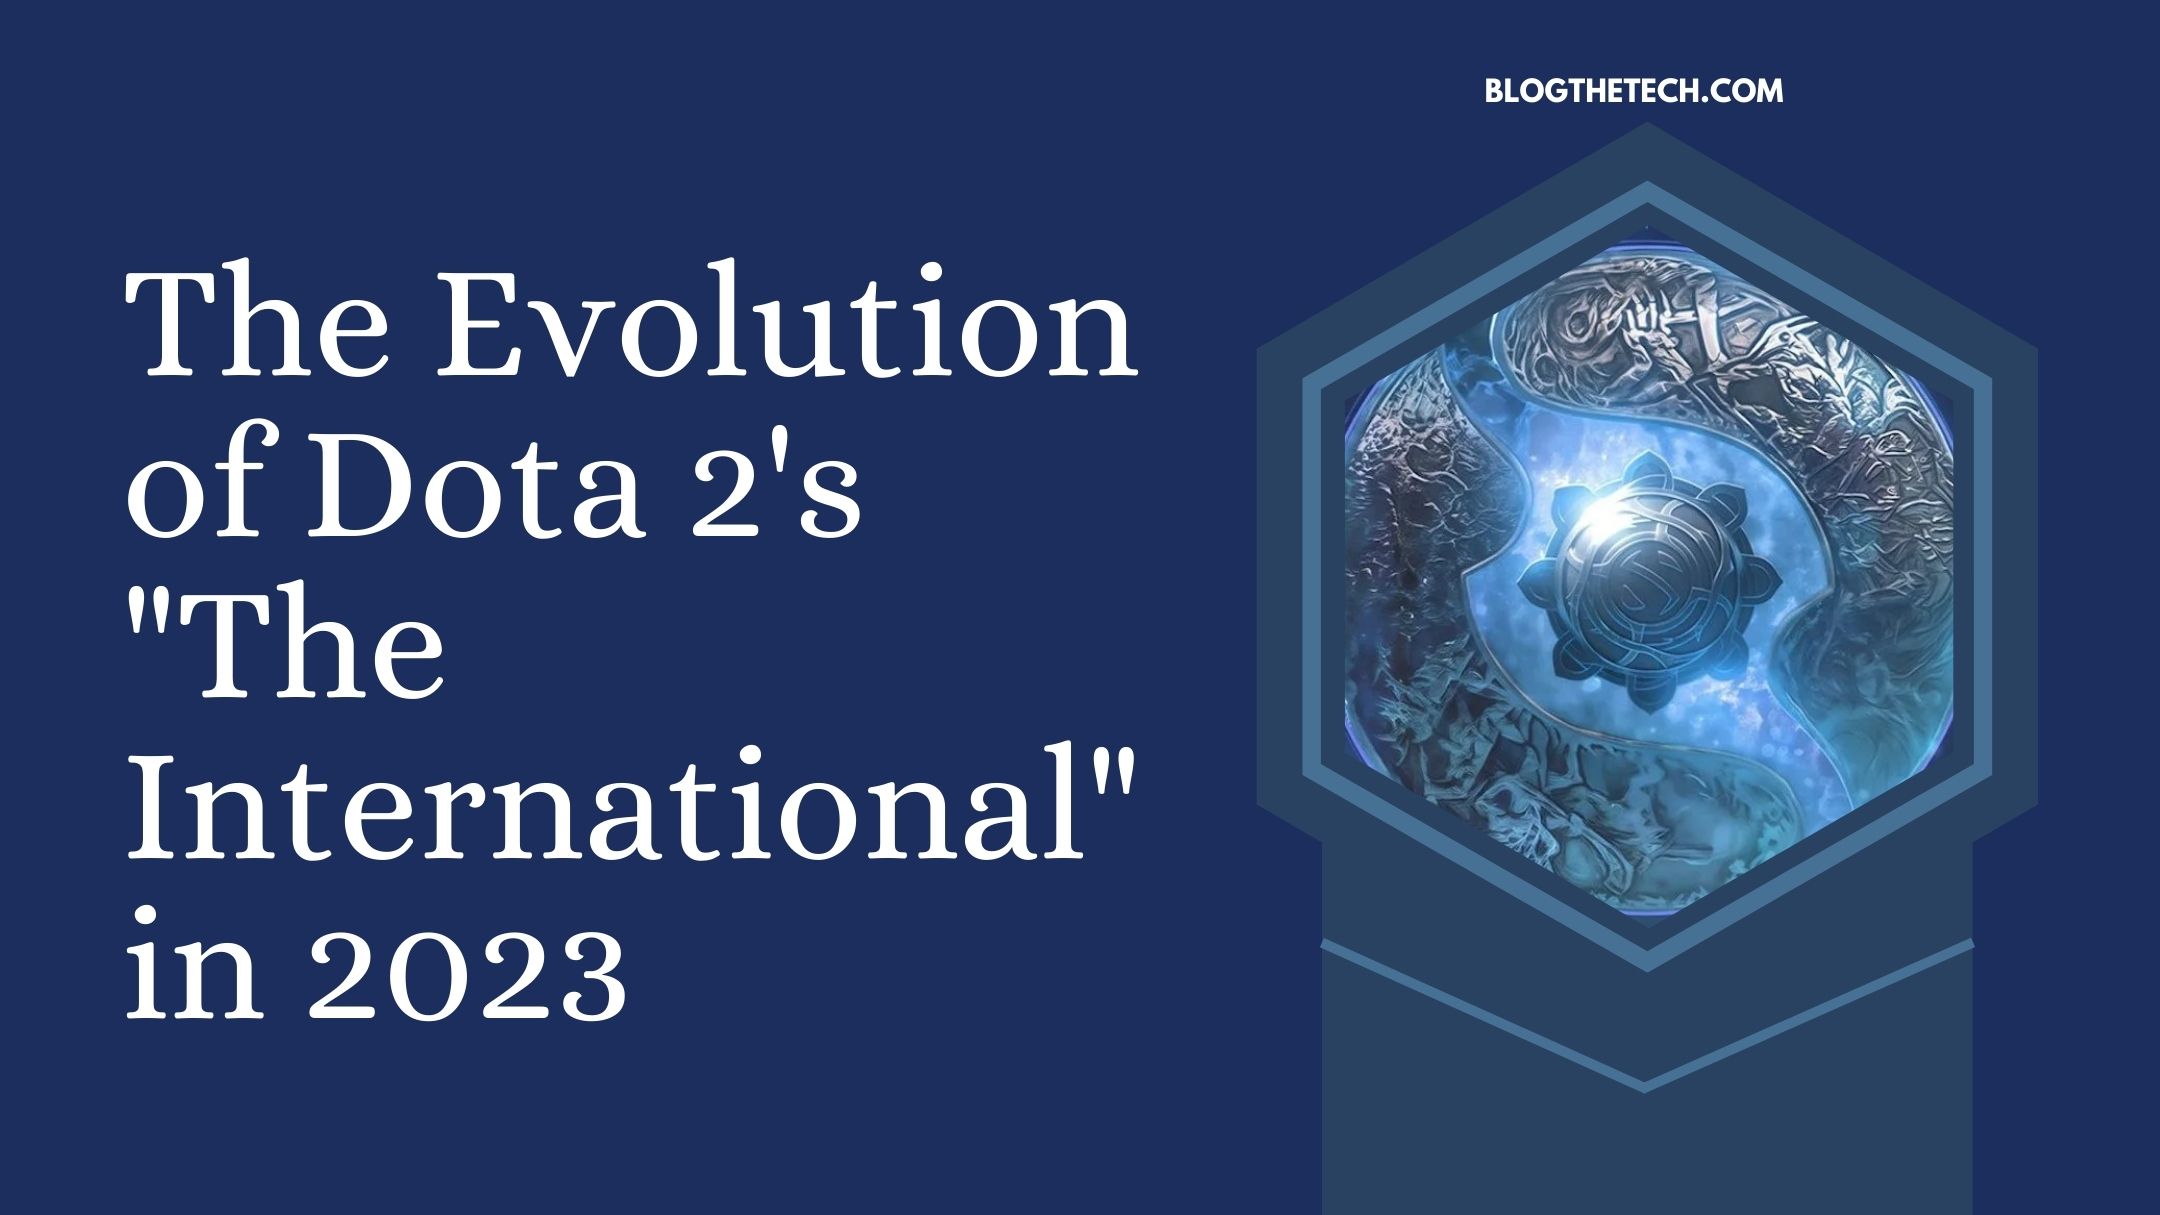 the-evolution-of-dota-2s-the-international-in-2023-featured